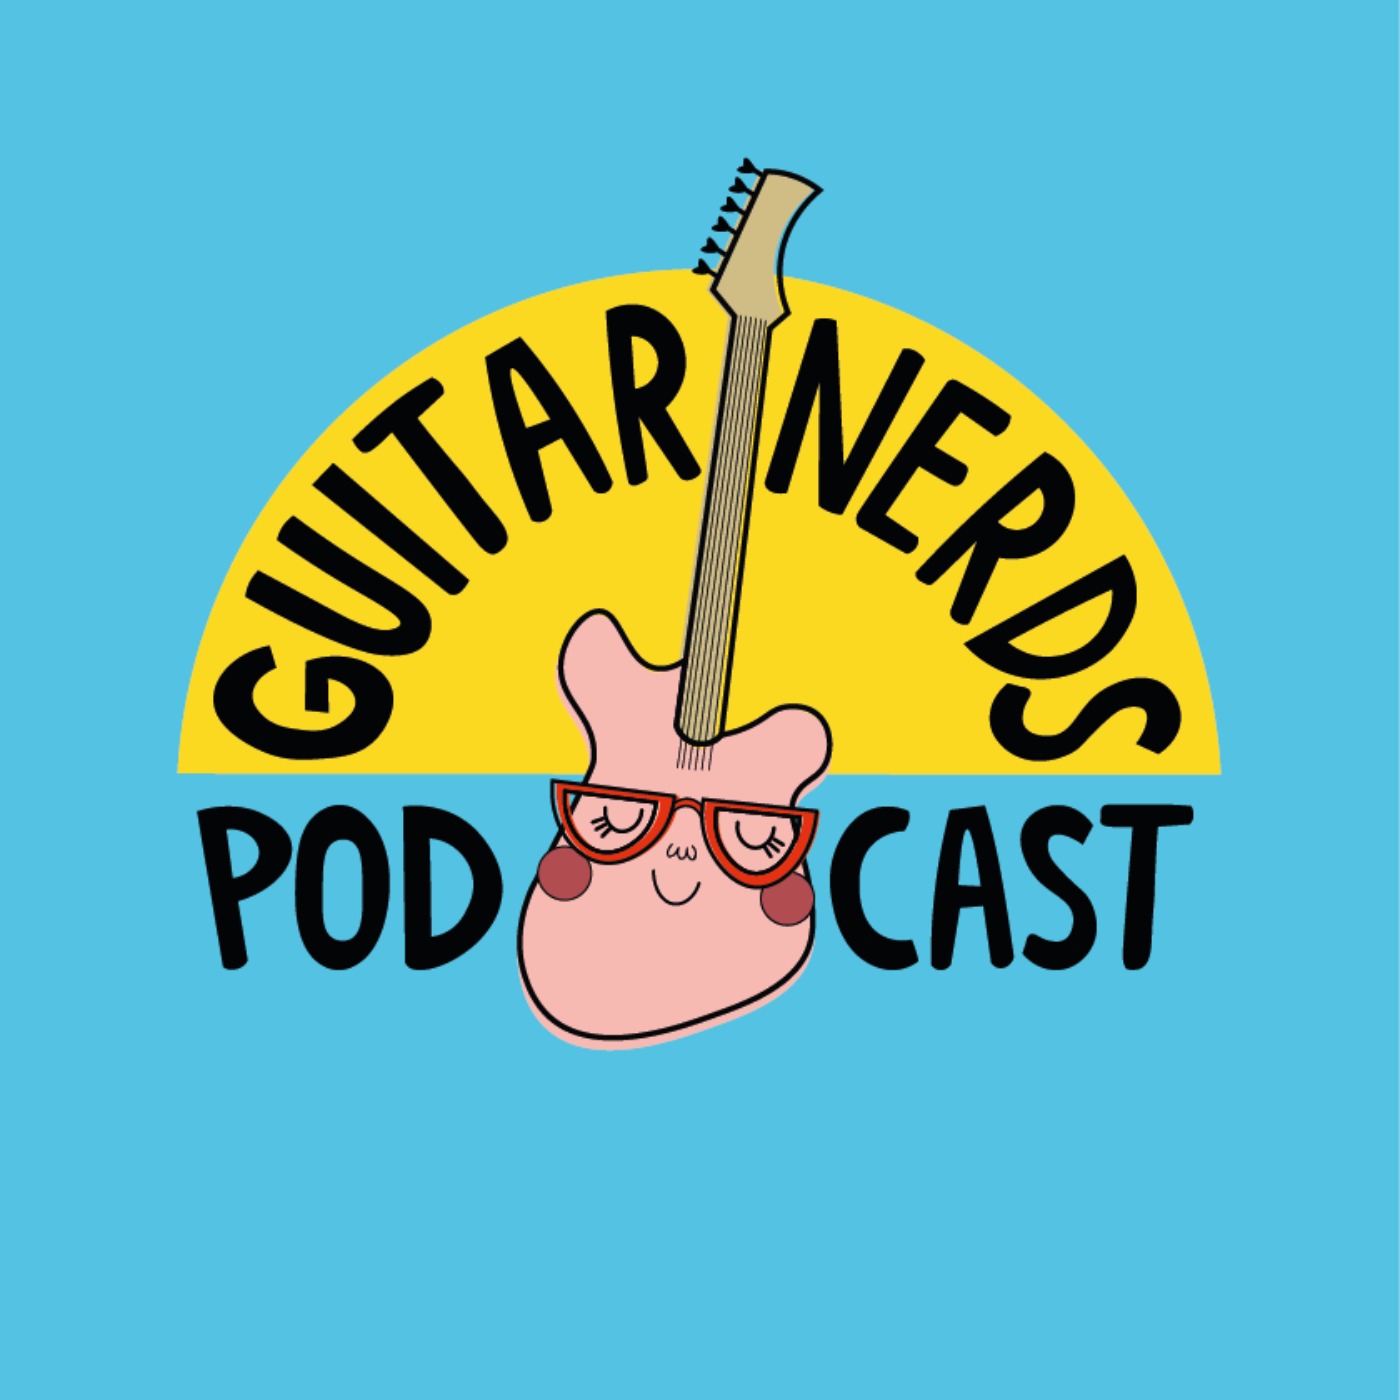 The Guitar Nerds Accessories Special!